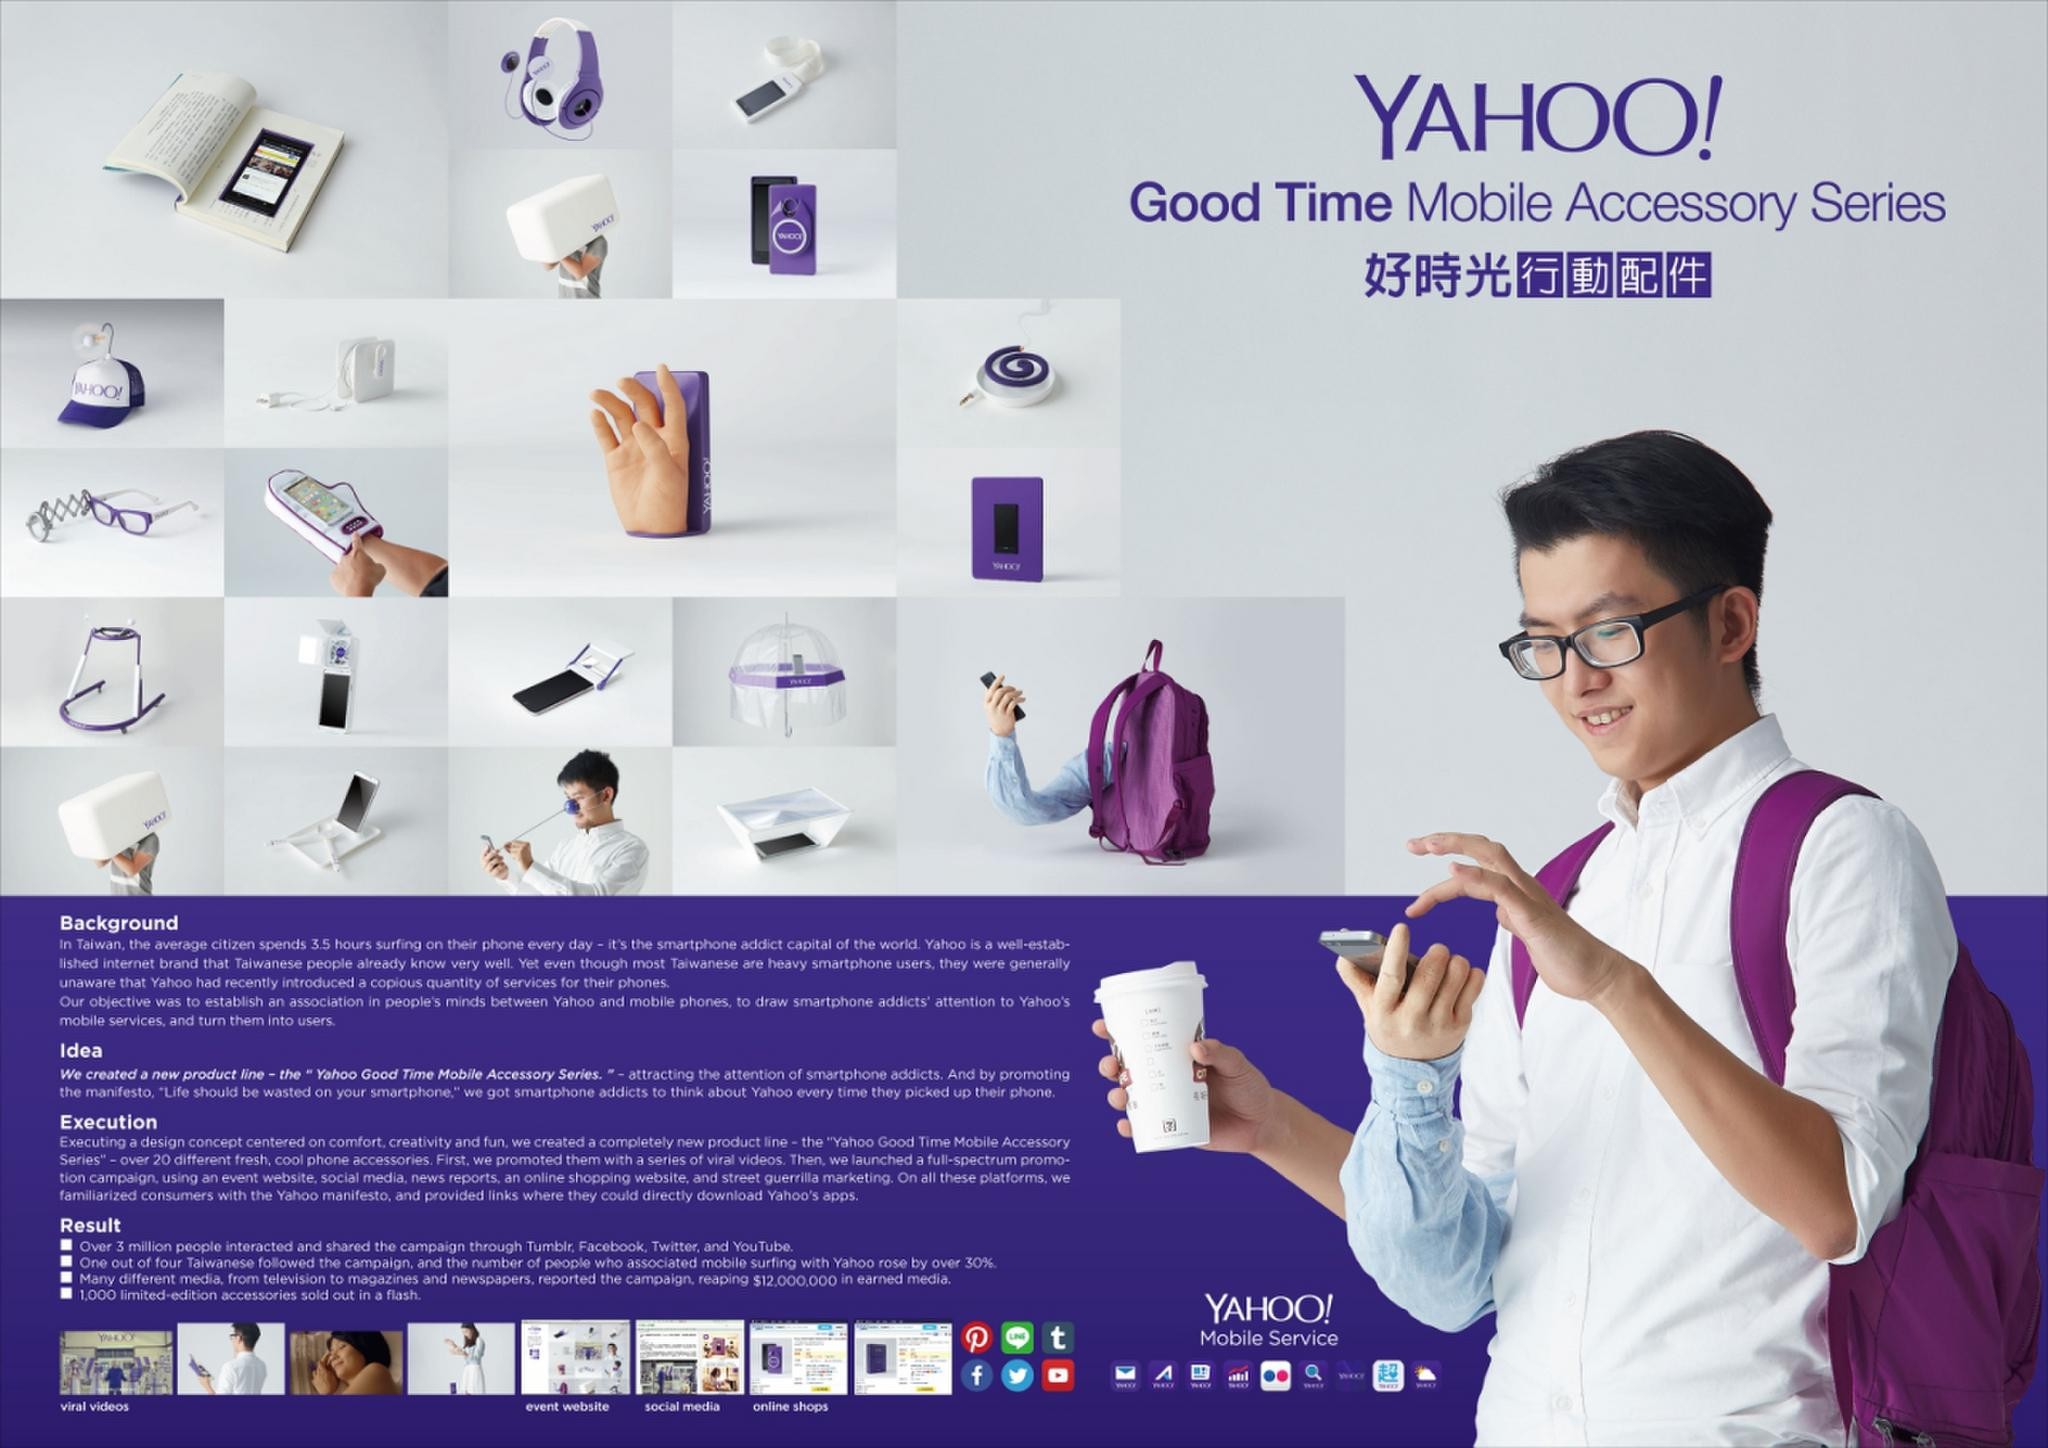 Yahoo Good Time Mobile Accessory Series